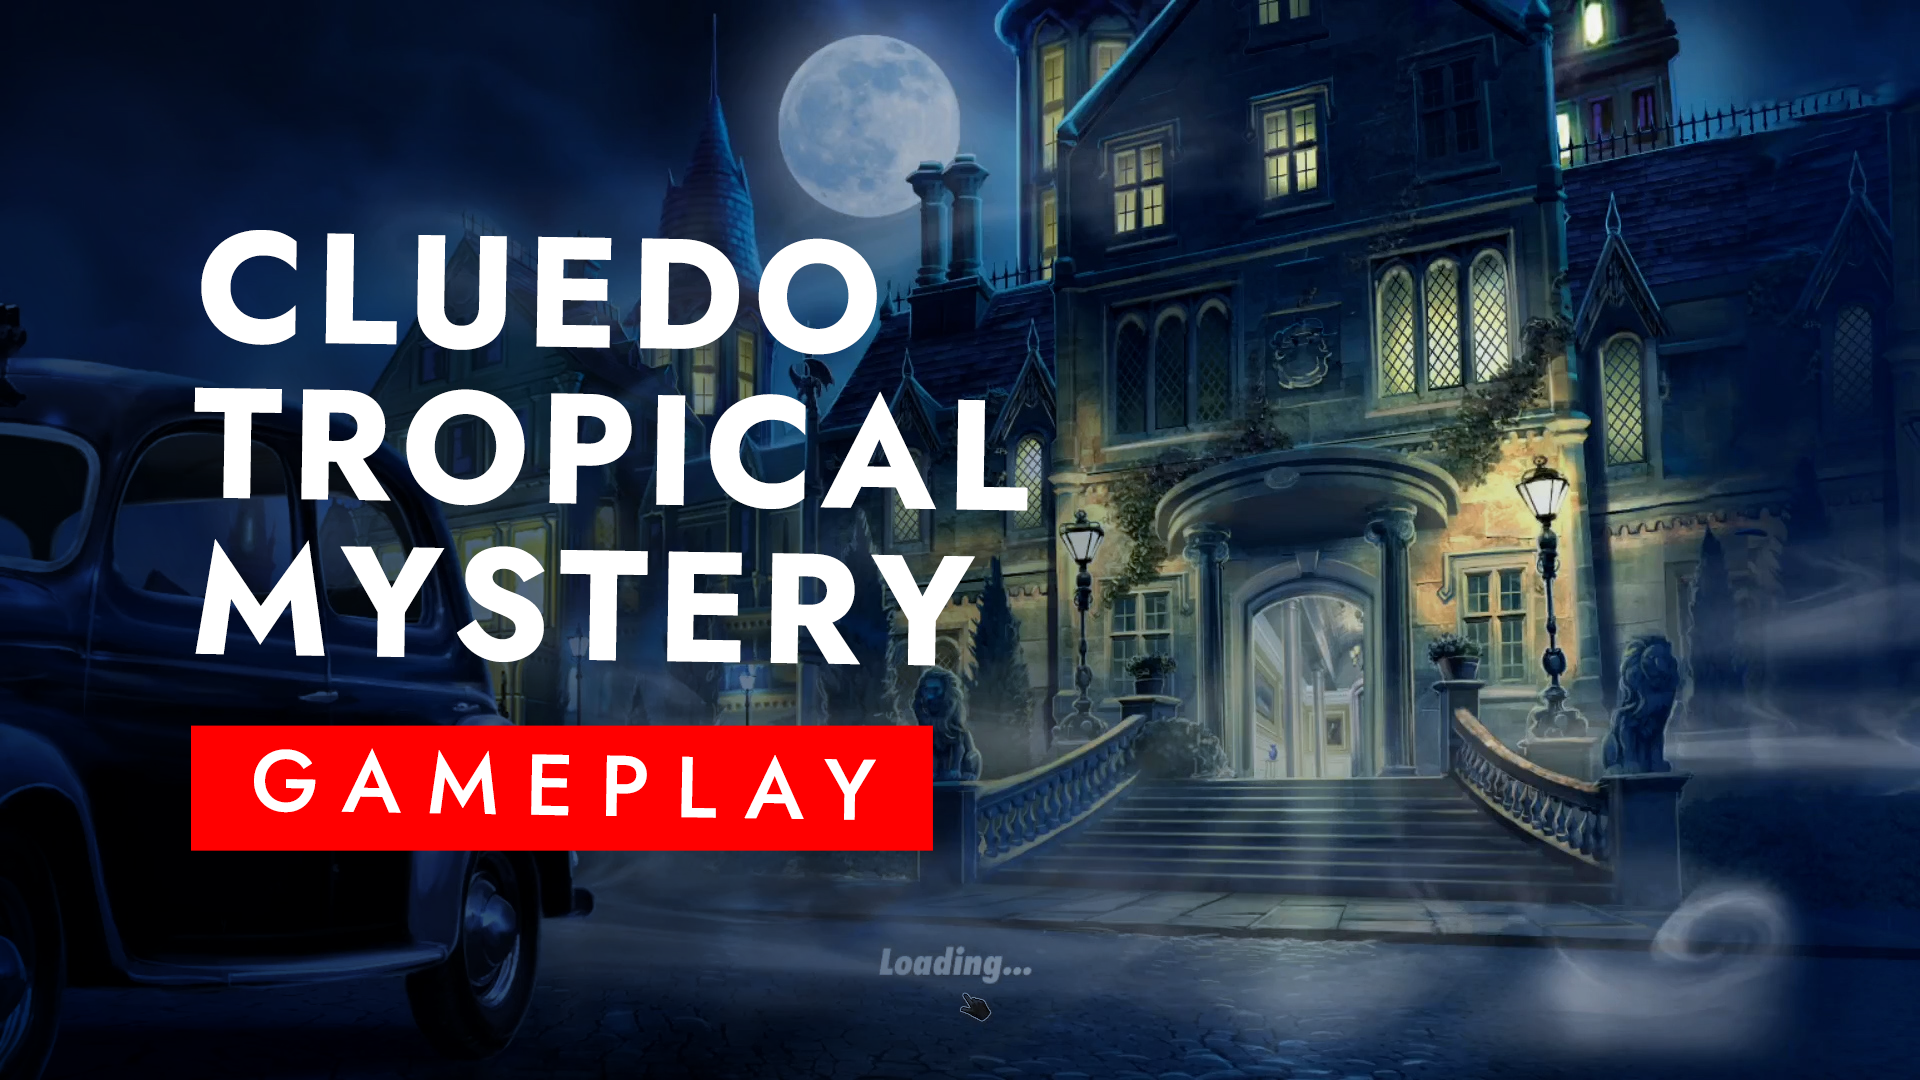 Cluedo Tropical Mystery Gameplay